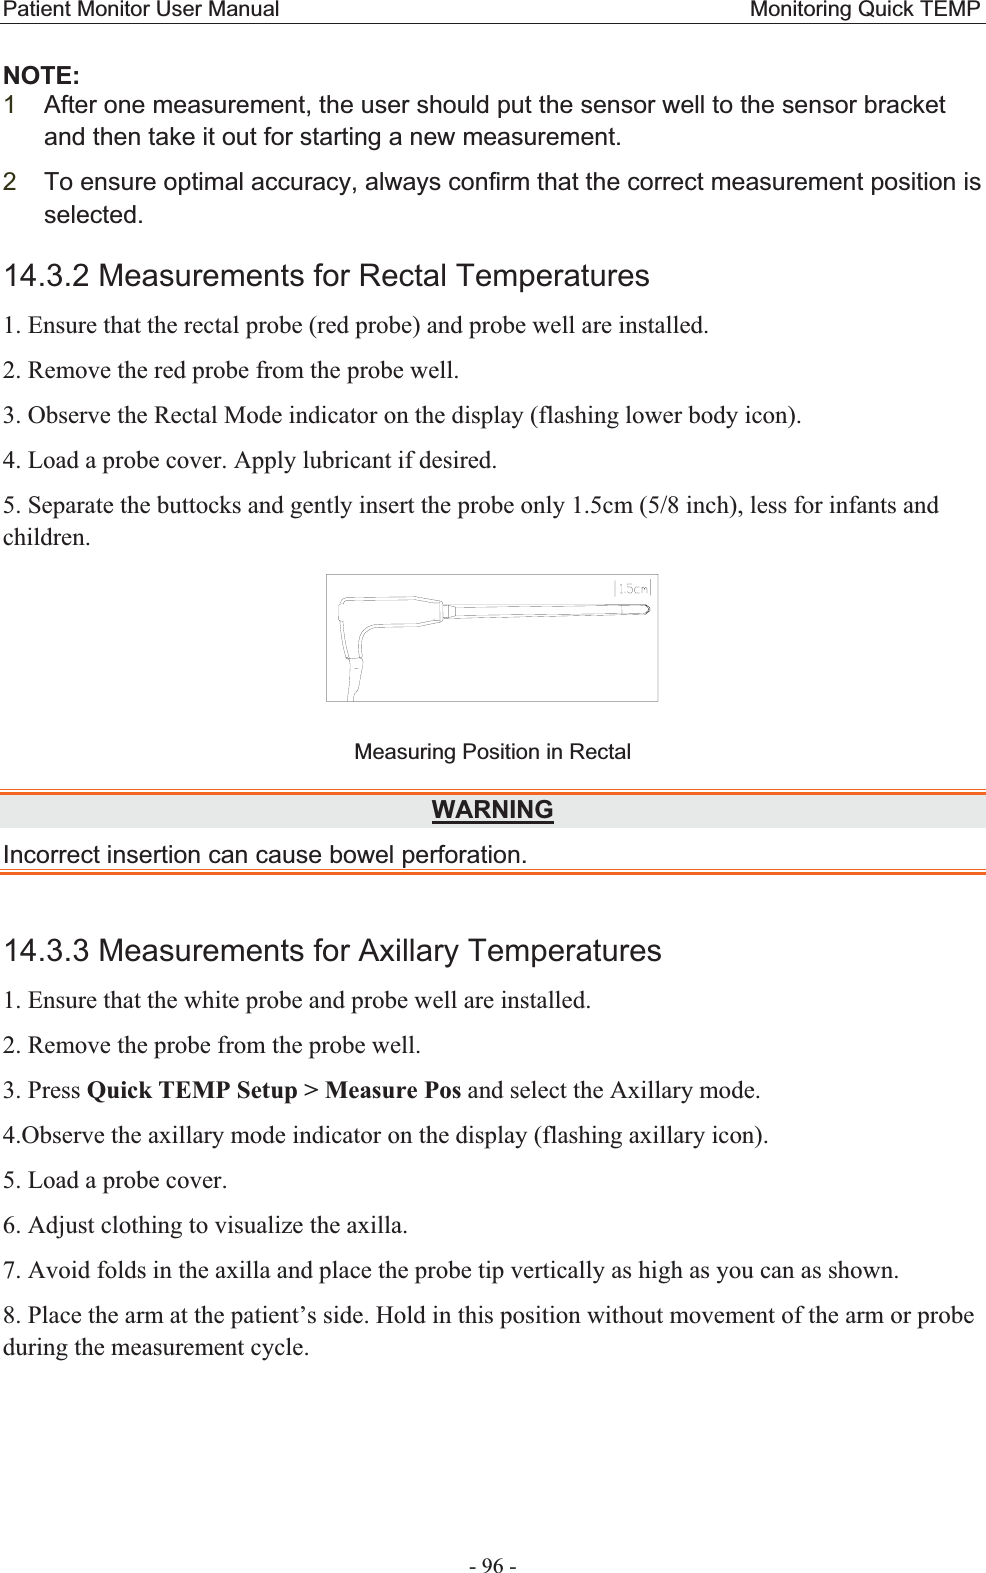 Patient Monitor User Manual                                           Monitoring Quick TEMP  - 96 - NOTE:1After one measurement, the user should put the sensor well to the sensor bracket and then take it out for starting a new measurement.   2To ensure optimal accuracy, always confirm that the correct measurement position is selected.14.3.2 Measurements for Rectal Temperatures1. Ensure that the rectal probe (red probe) and probe well are installed. 2. Remove the red probe from the probe well. 3. Observe the Rectal Mode indicator on the display (flashing lower body icon). 4. Load a probe cover. Apply lubricant if desired. 5. Separate the buttocks and gently insert the probe only 1.5cm (5/8 inch), less for infants and children.  Measuring Position in Rectal WARNINGIncorrect insertion can cause bowel perforation.   14.3.3 Measurements for Axillary Temperatures1. Ensure that the white probe and probe well are installed. 2. Remove the probe from the probe well. 3. Press Quick TEMP Setup &gt; Measure Pos and select the Axillary mode. 4.Observe the axillary mode indicator on the display (flashing axillary icon). 5. Load a probe cover.   6. Adjust clothing to visualize the axilla. 7. Avoid folds in the axilla and place the probe tip vertically as high as you can as shown. 8. Place the arm at the patient’s side. Hold in this position without movement of the arm or probe during the measurement cycle. 